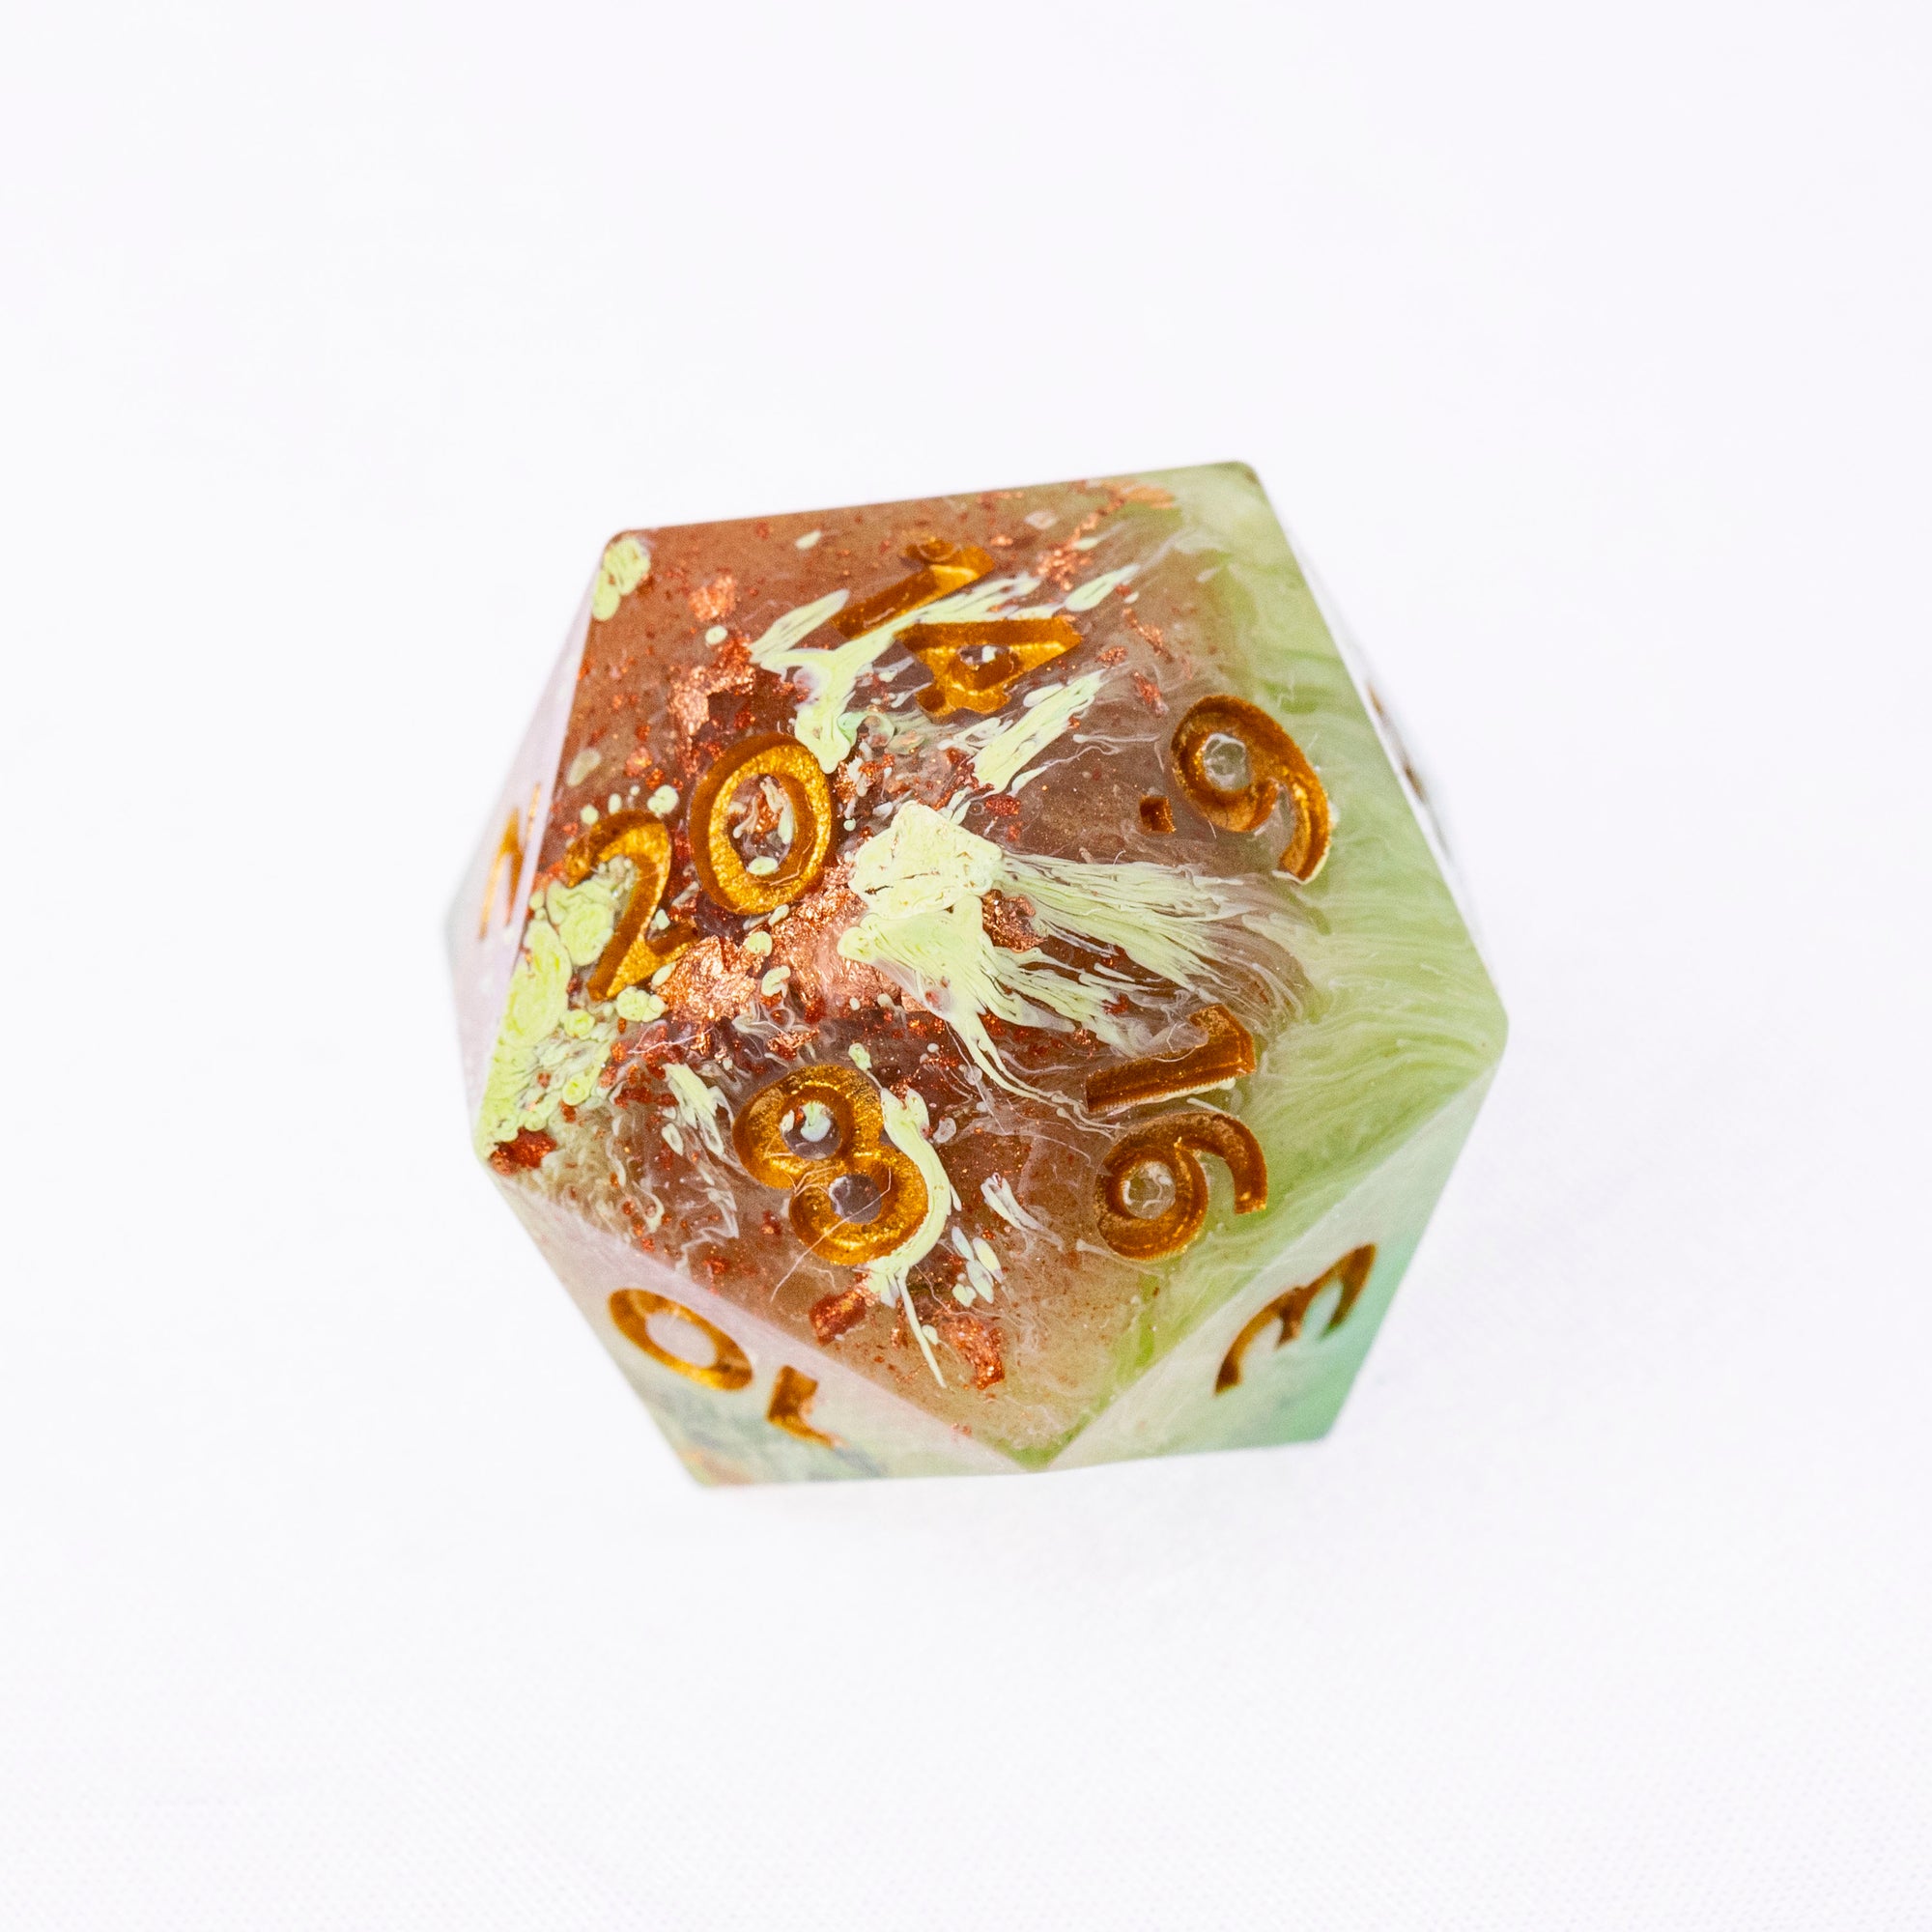 Mother of the Earth - 9 Piece Dice Set